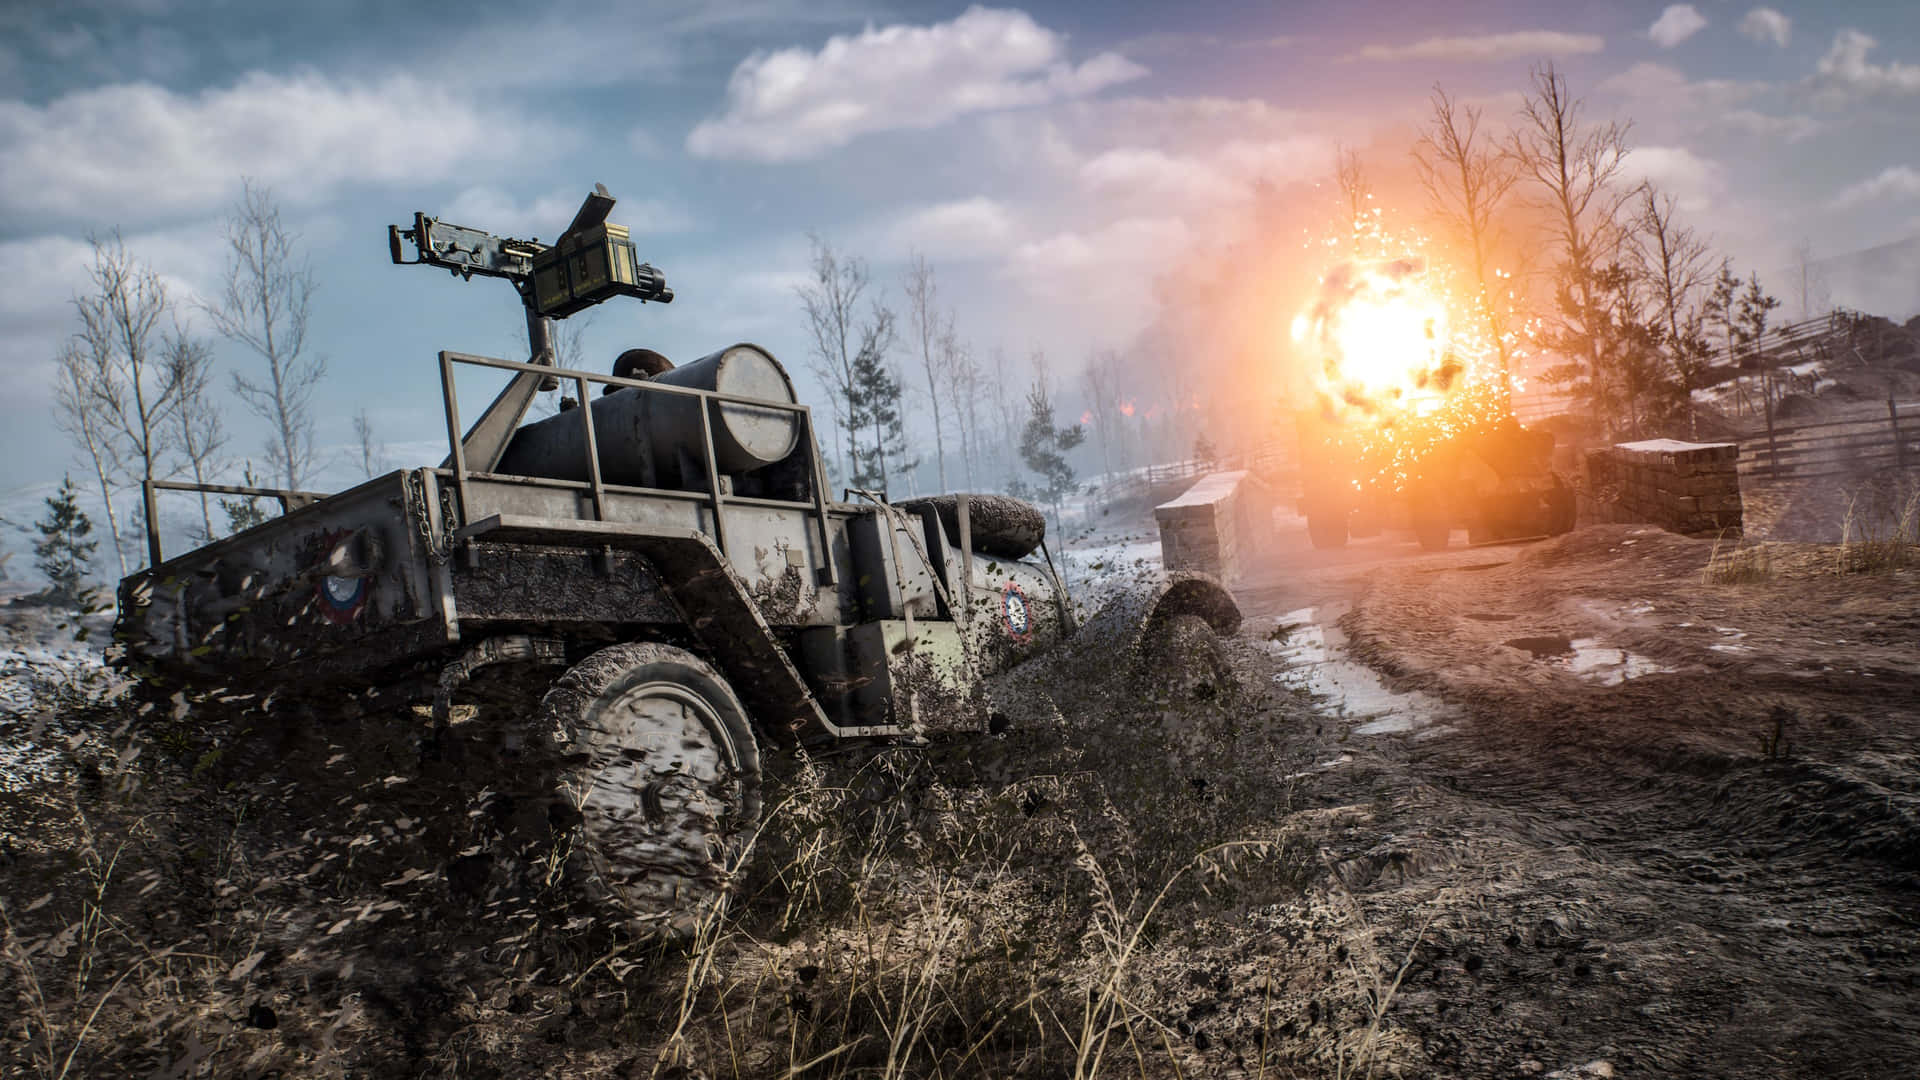 Military Battlefield Vehicles in Action Wallpaper